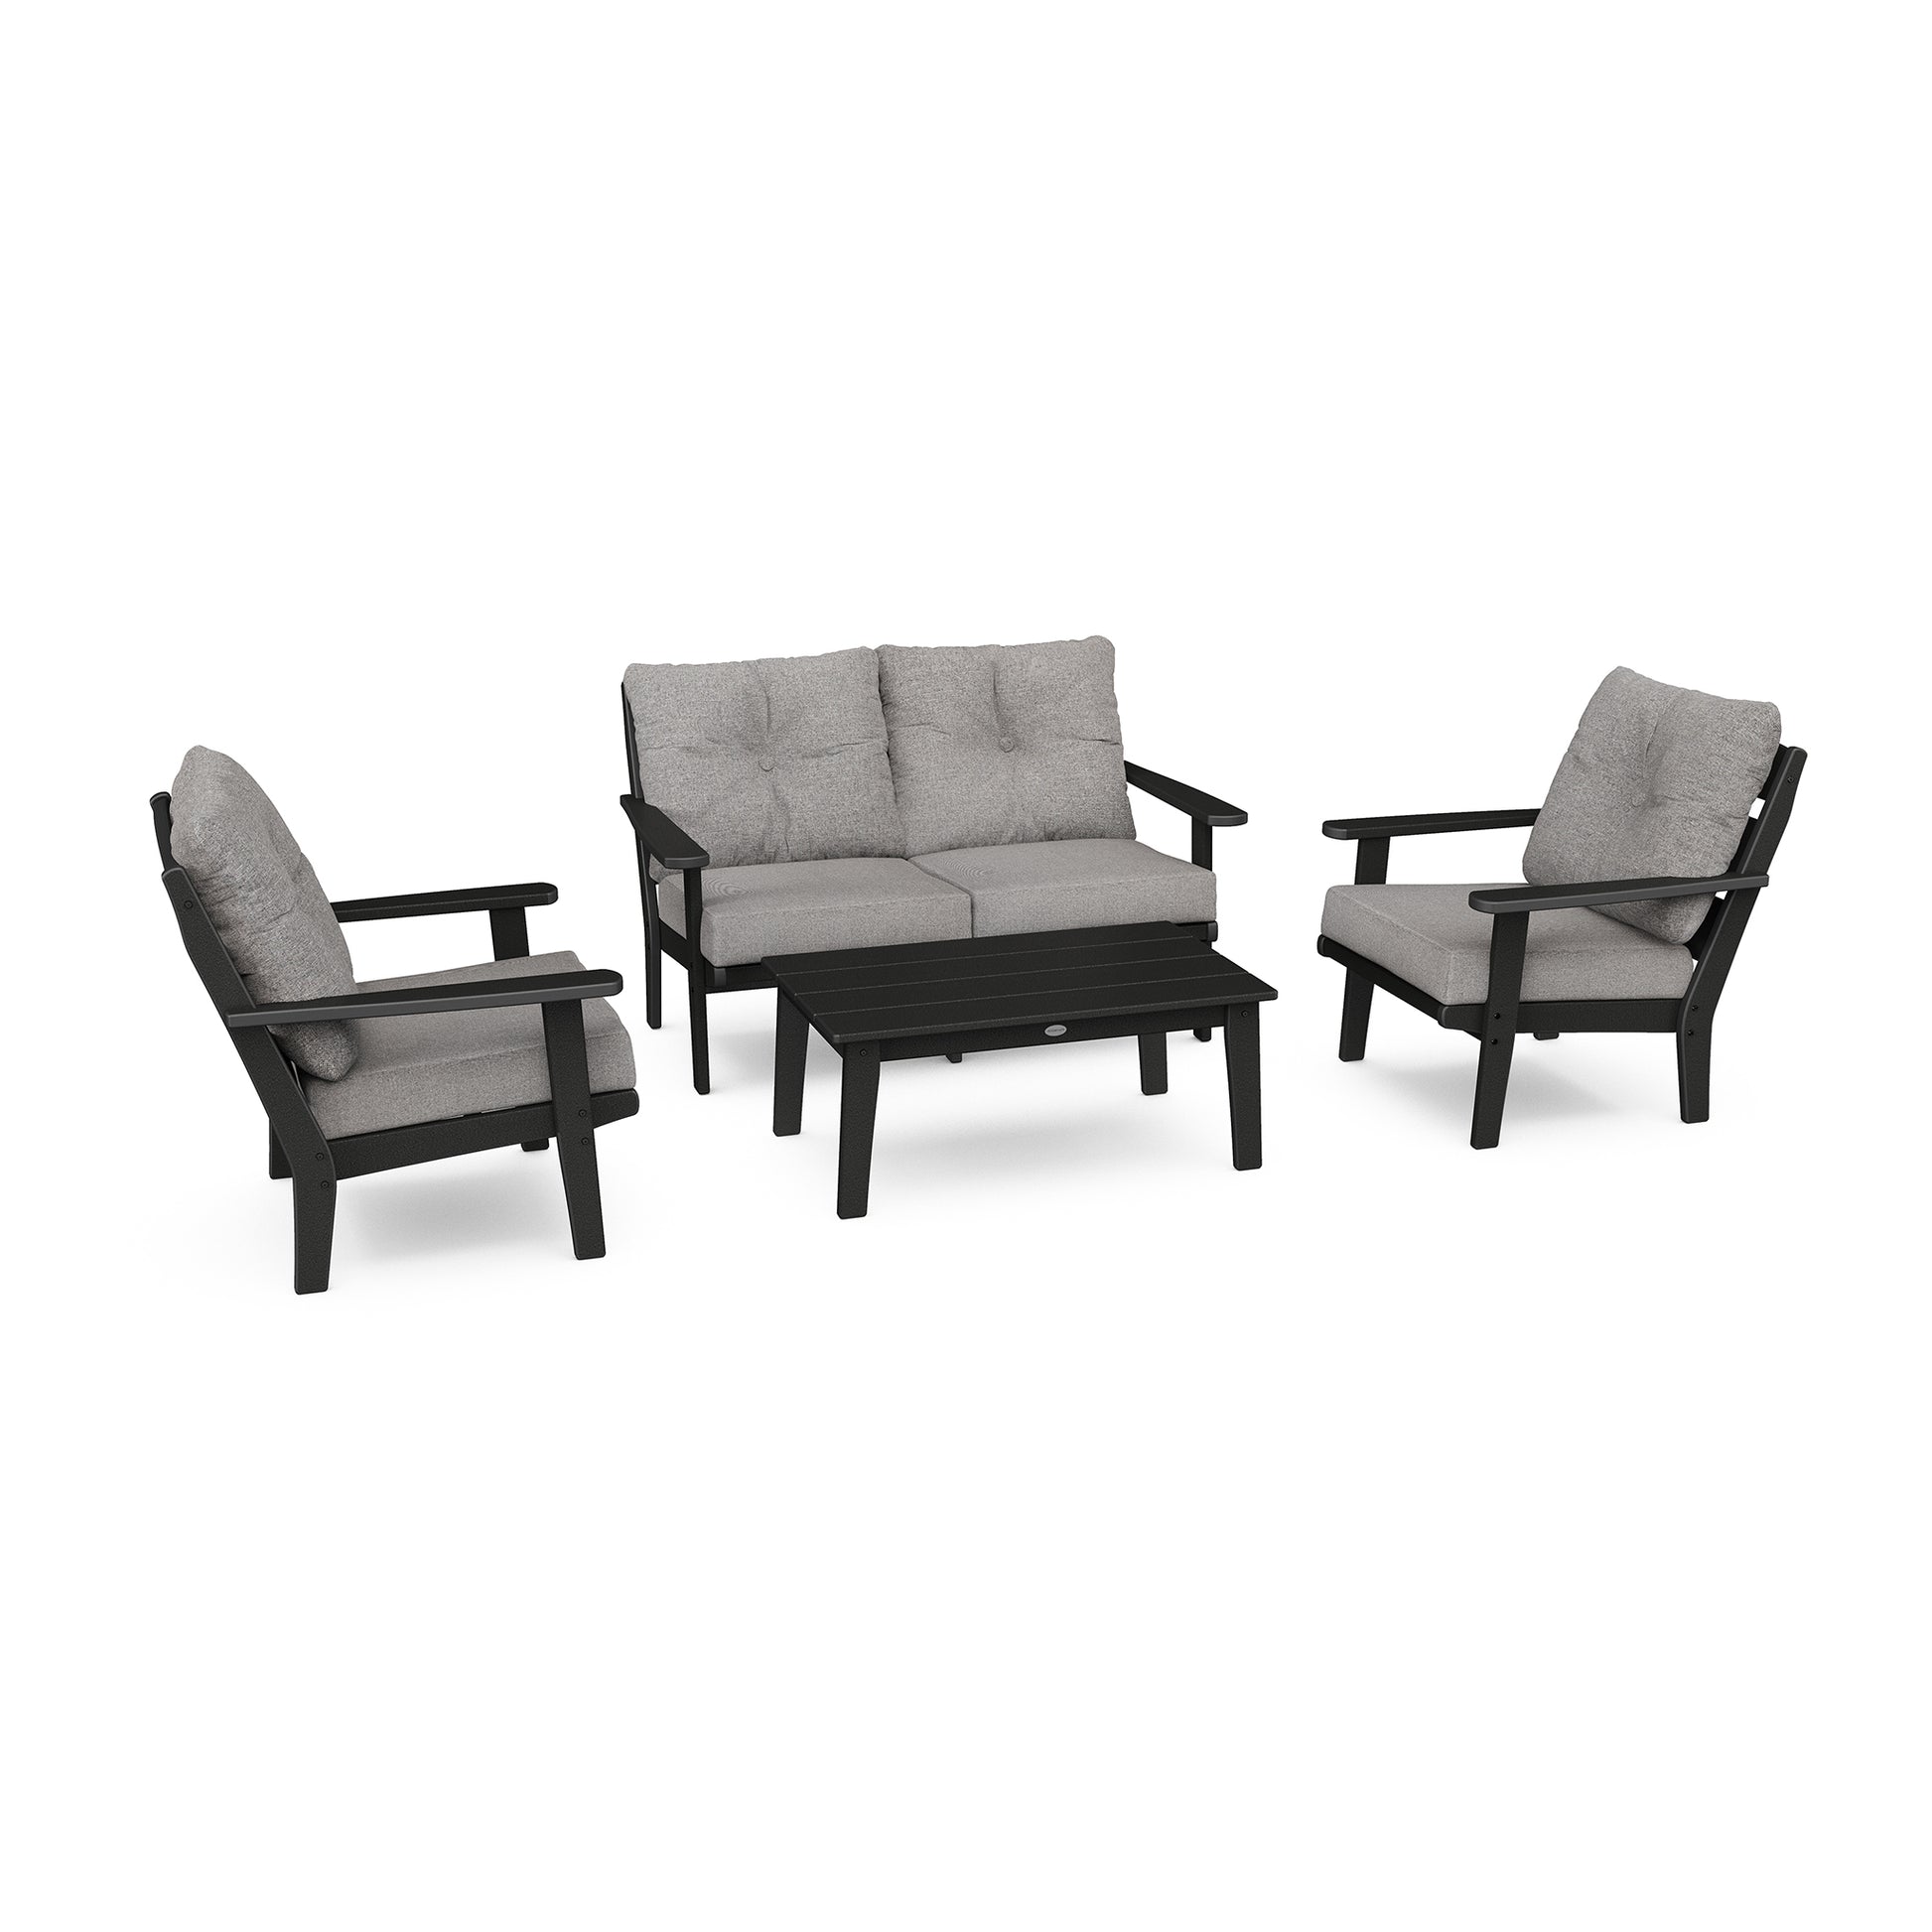 A modern POLYWOOD Lakeside 4-Piece Deep Seating Set featuring two armchairs, one loveseat, and a coffee table, all in dark gray with light gray cushions, crafted from POLY.